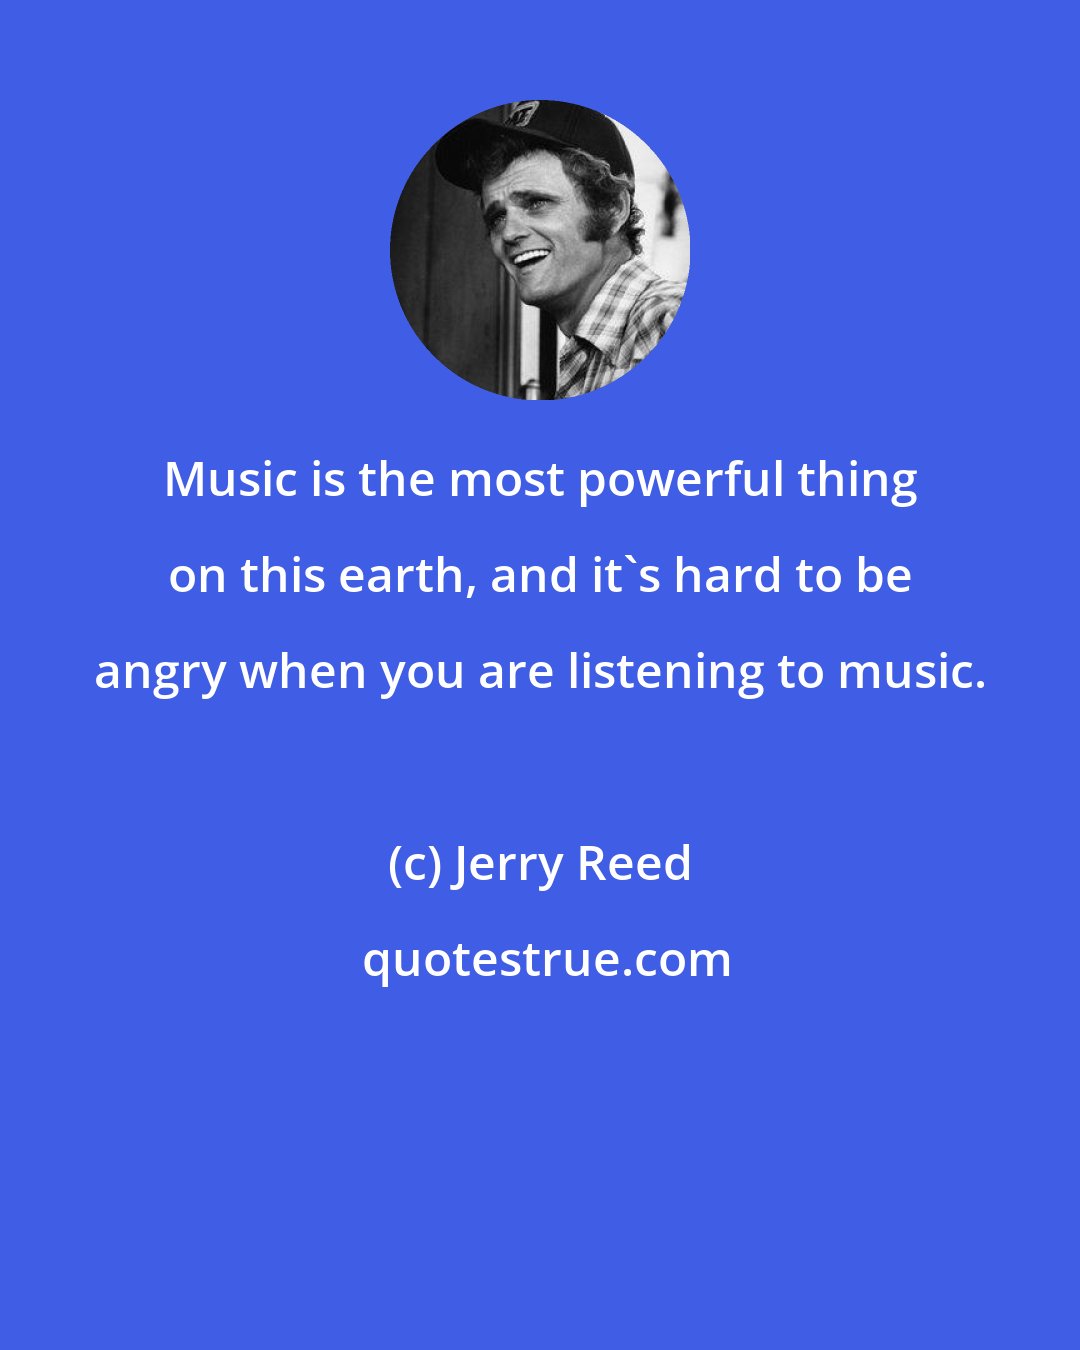 Jerry Reed: Music is the most powerful thing on this earth, and it's hard to be angry when you are listening to music.